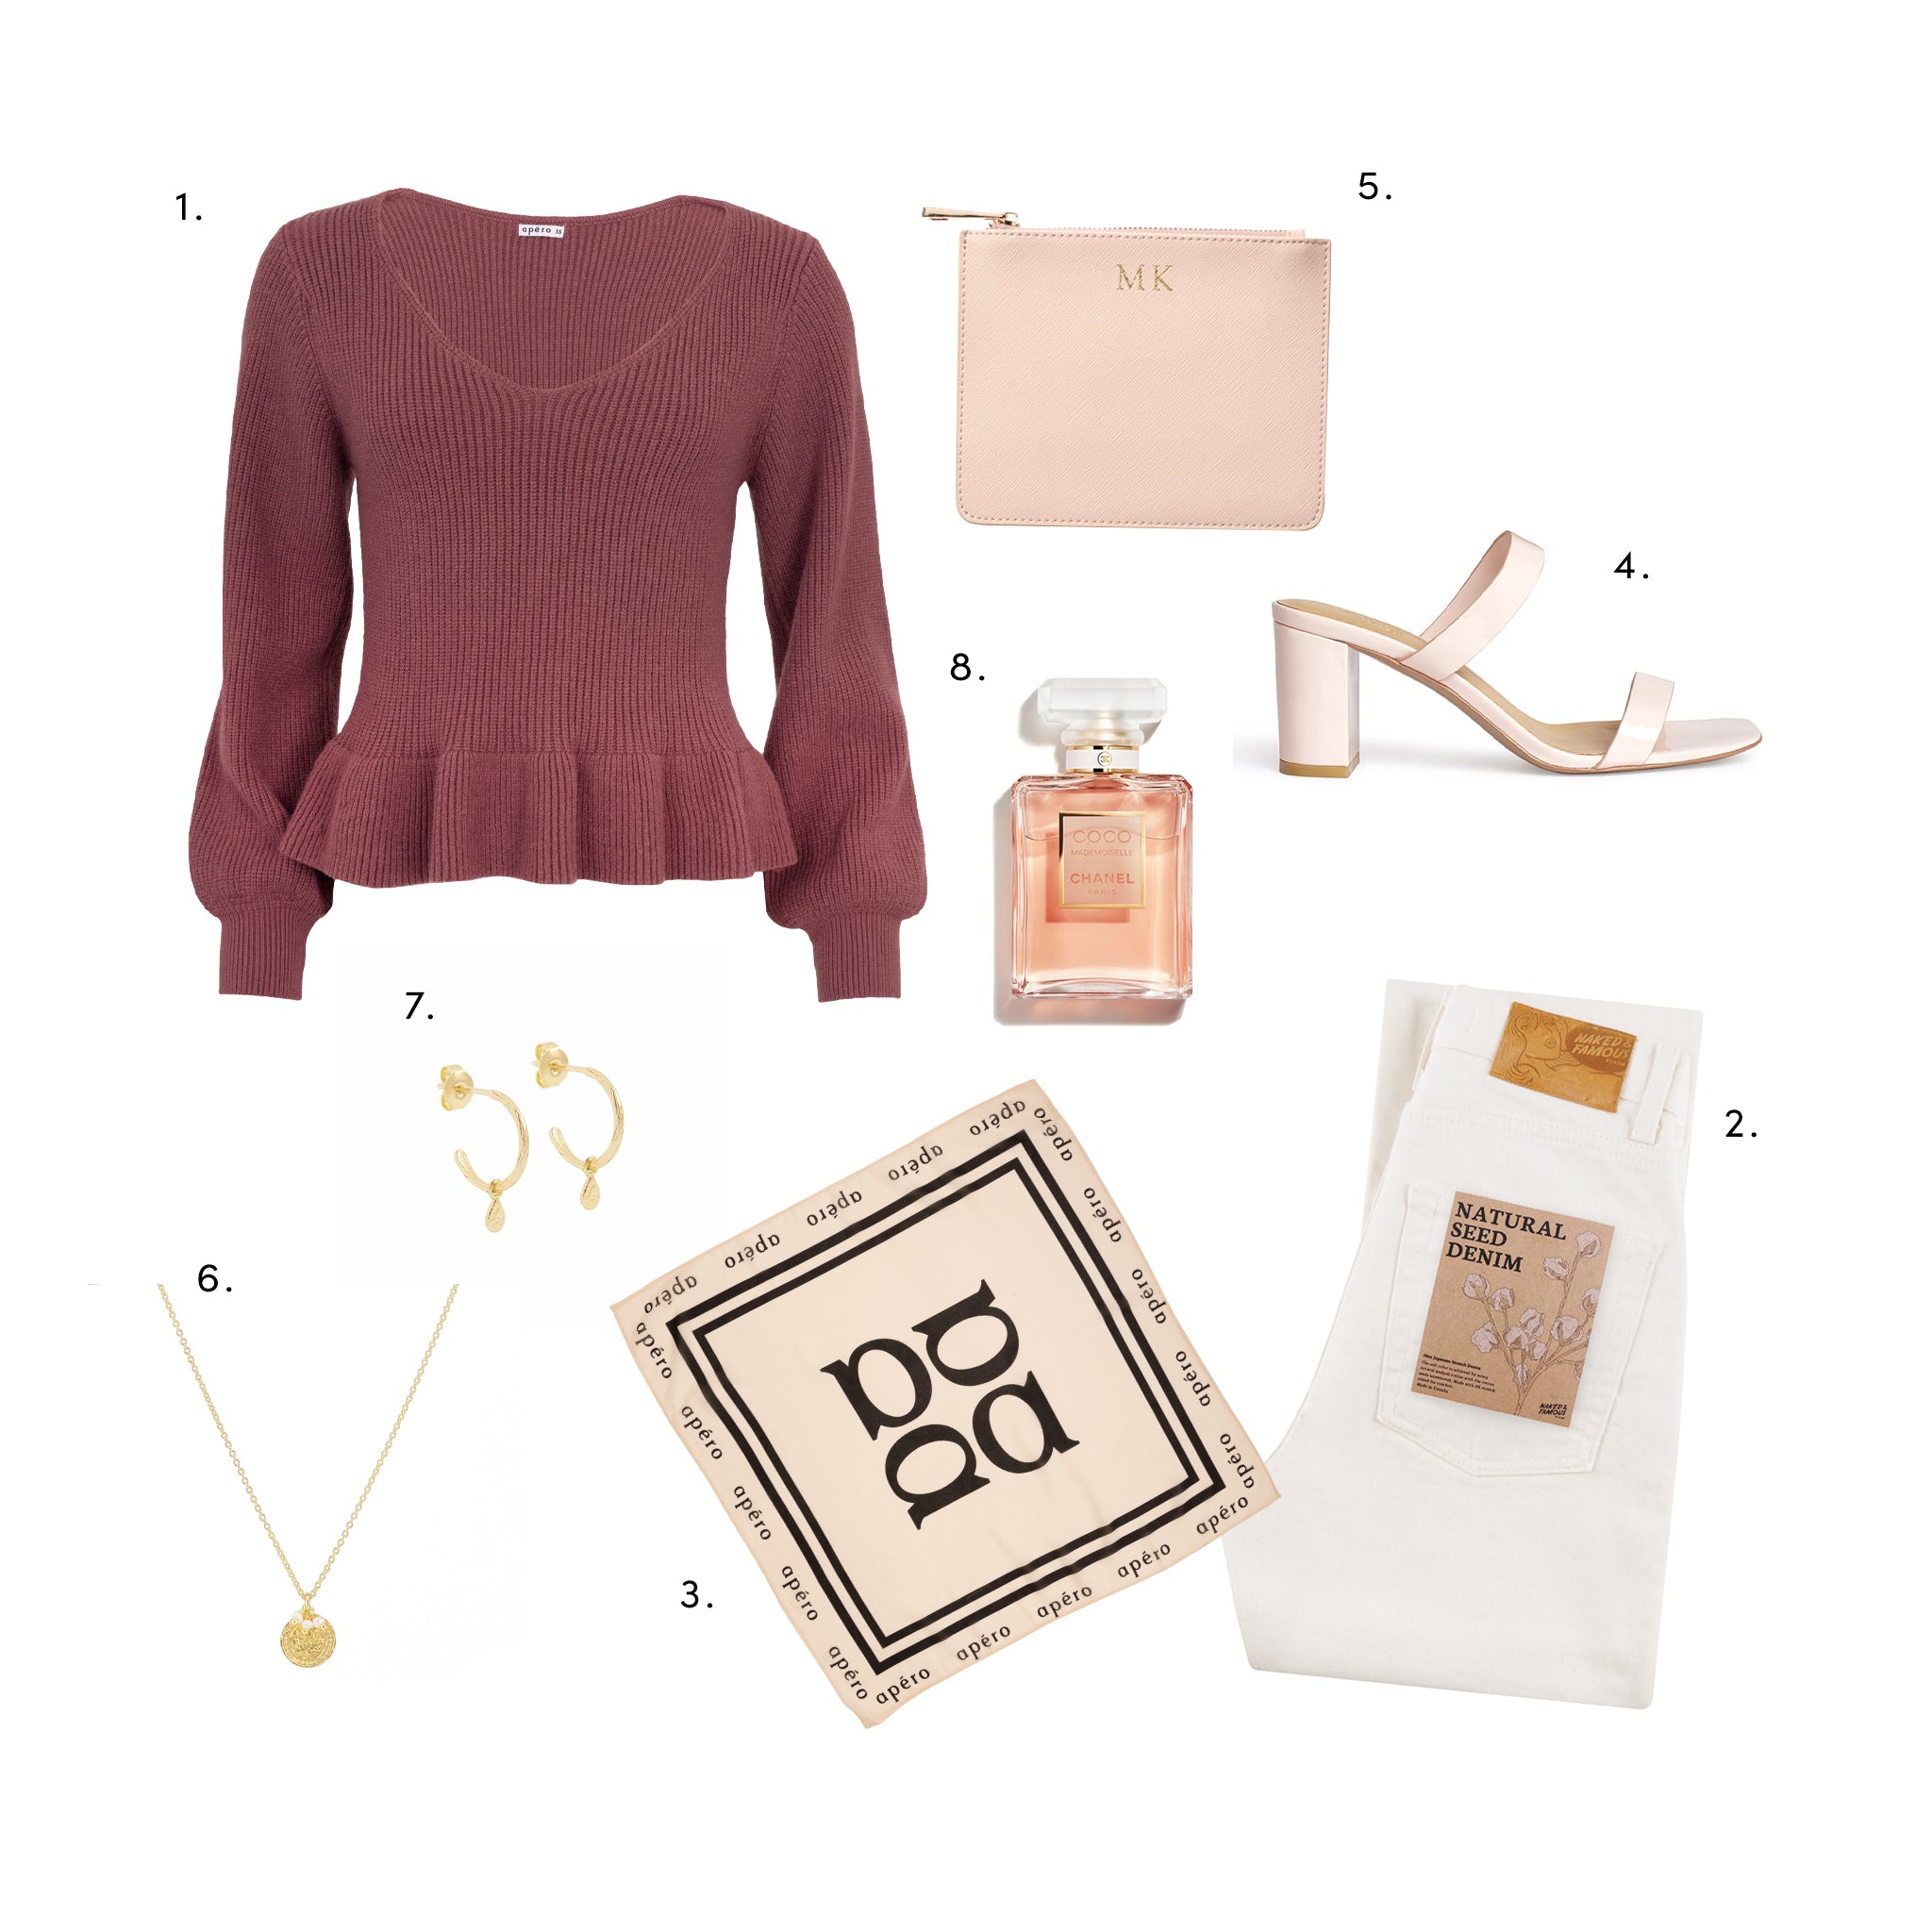 Feminine chic styling with Apero knit jumper